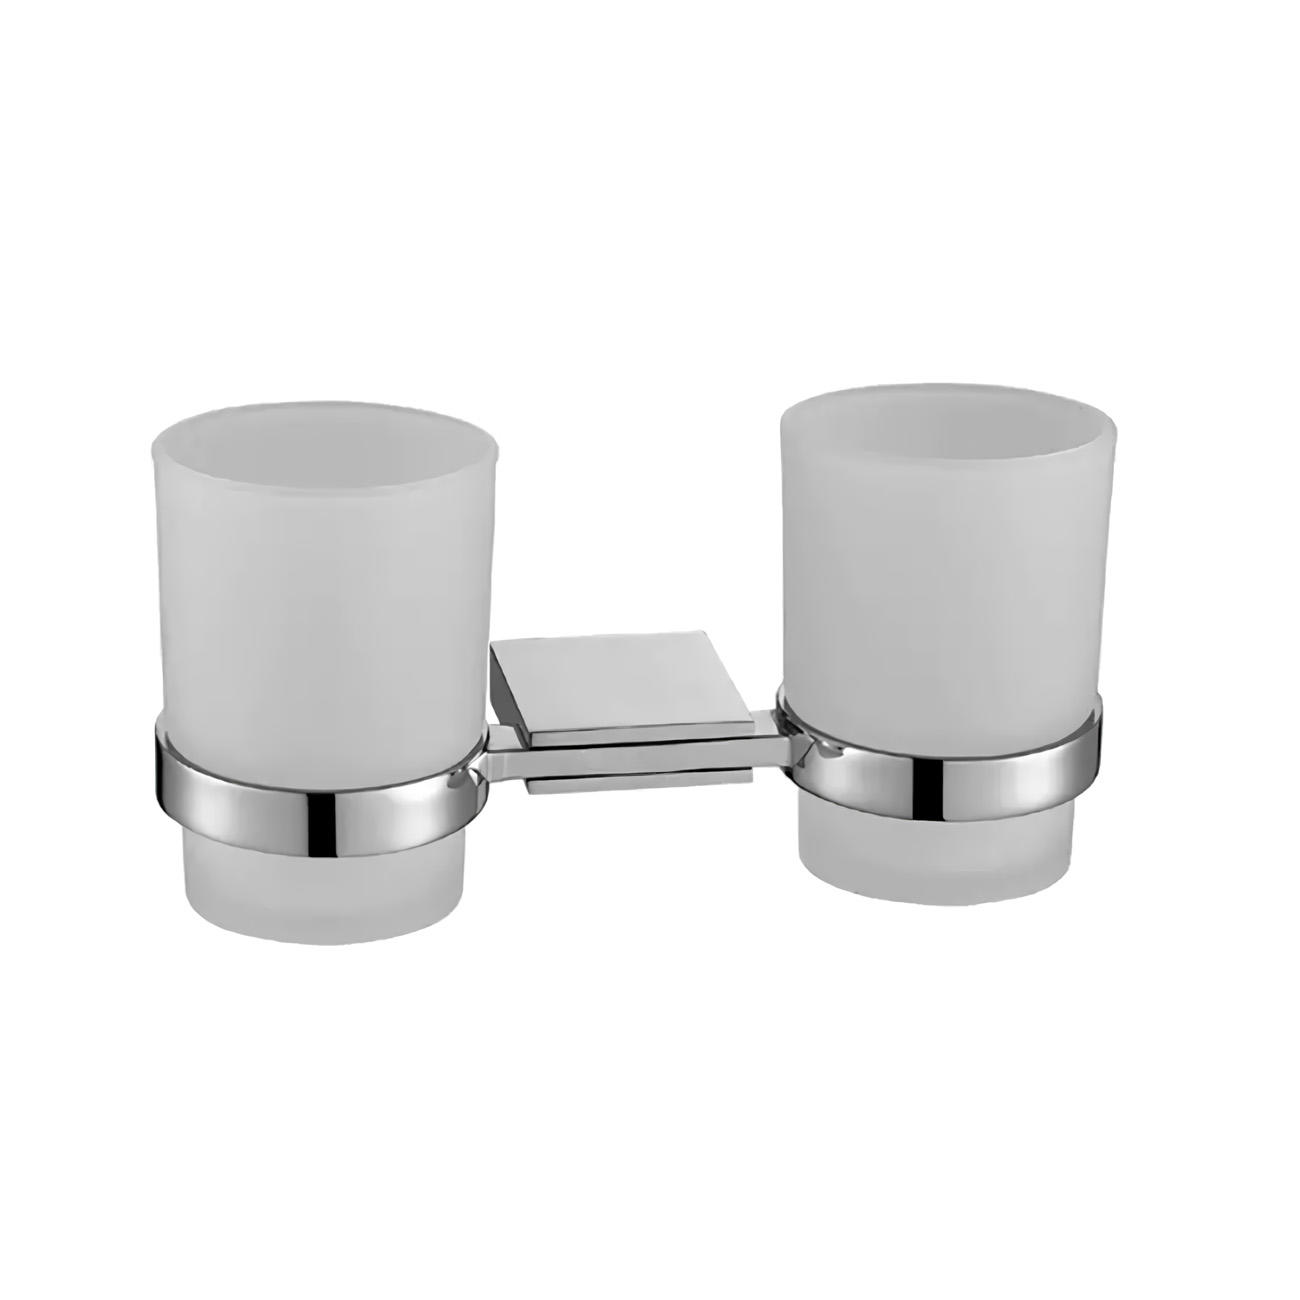 8607 Unique Wall Mount Toothbrush Cup Holder In Stainless Steel Bathroom Accessories